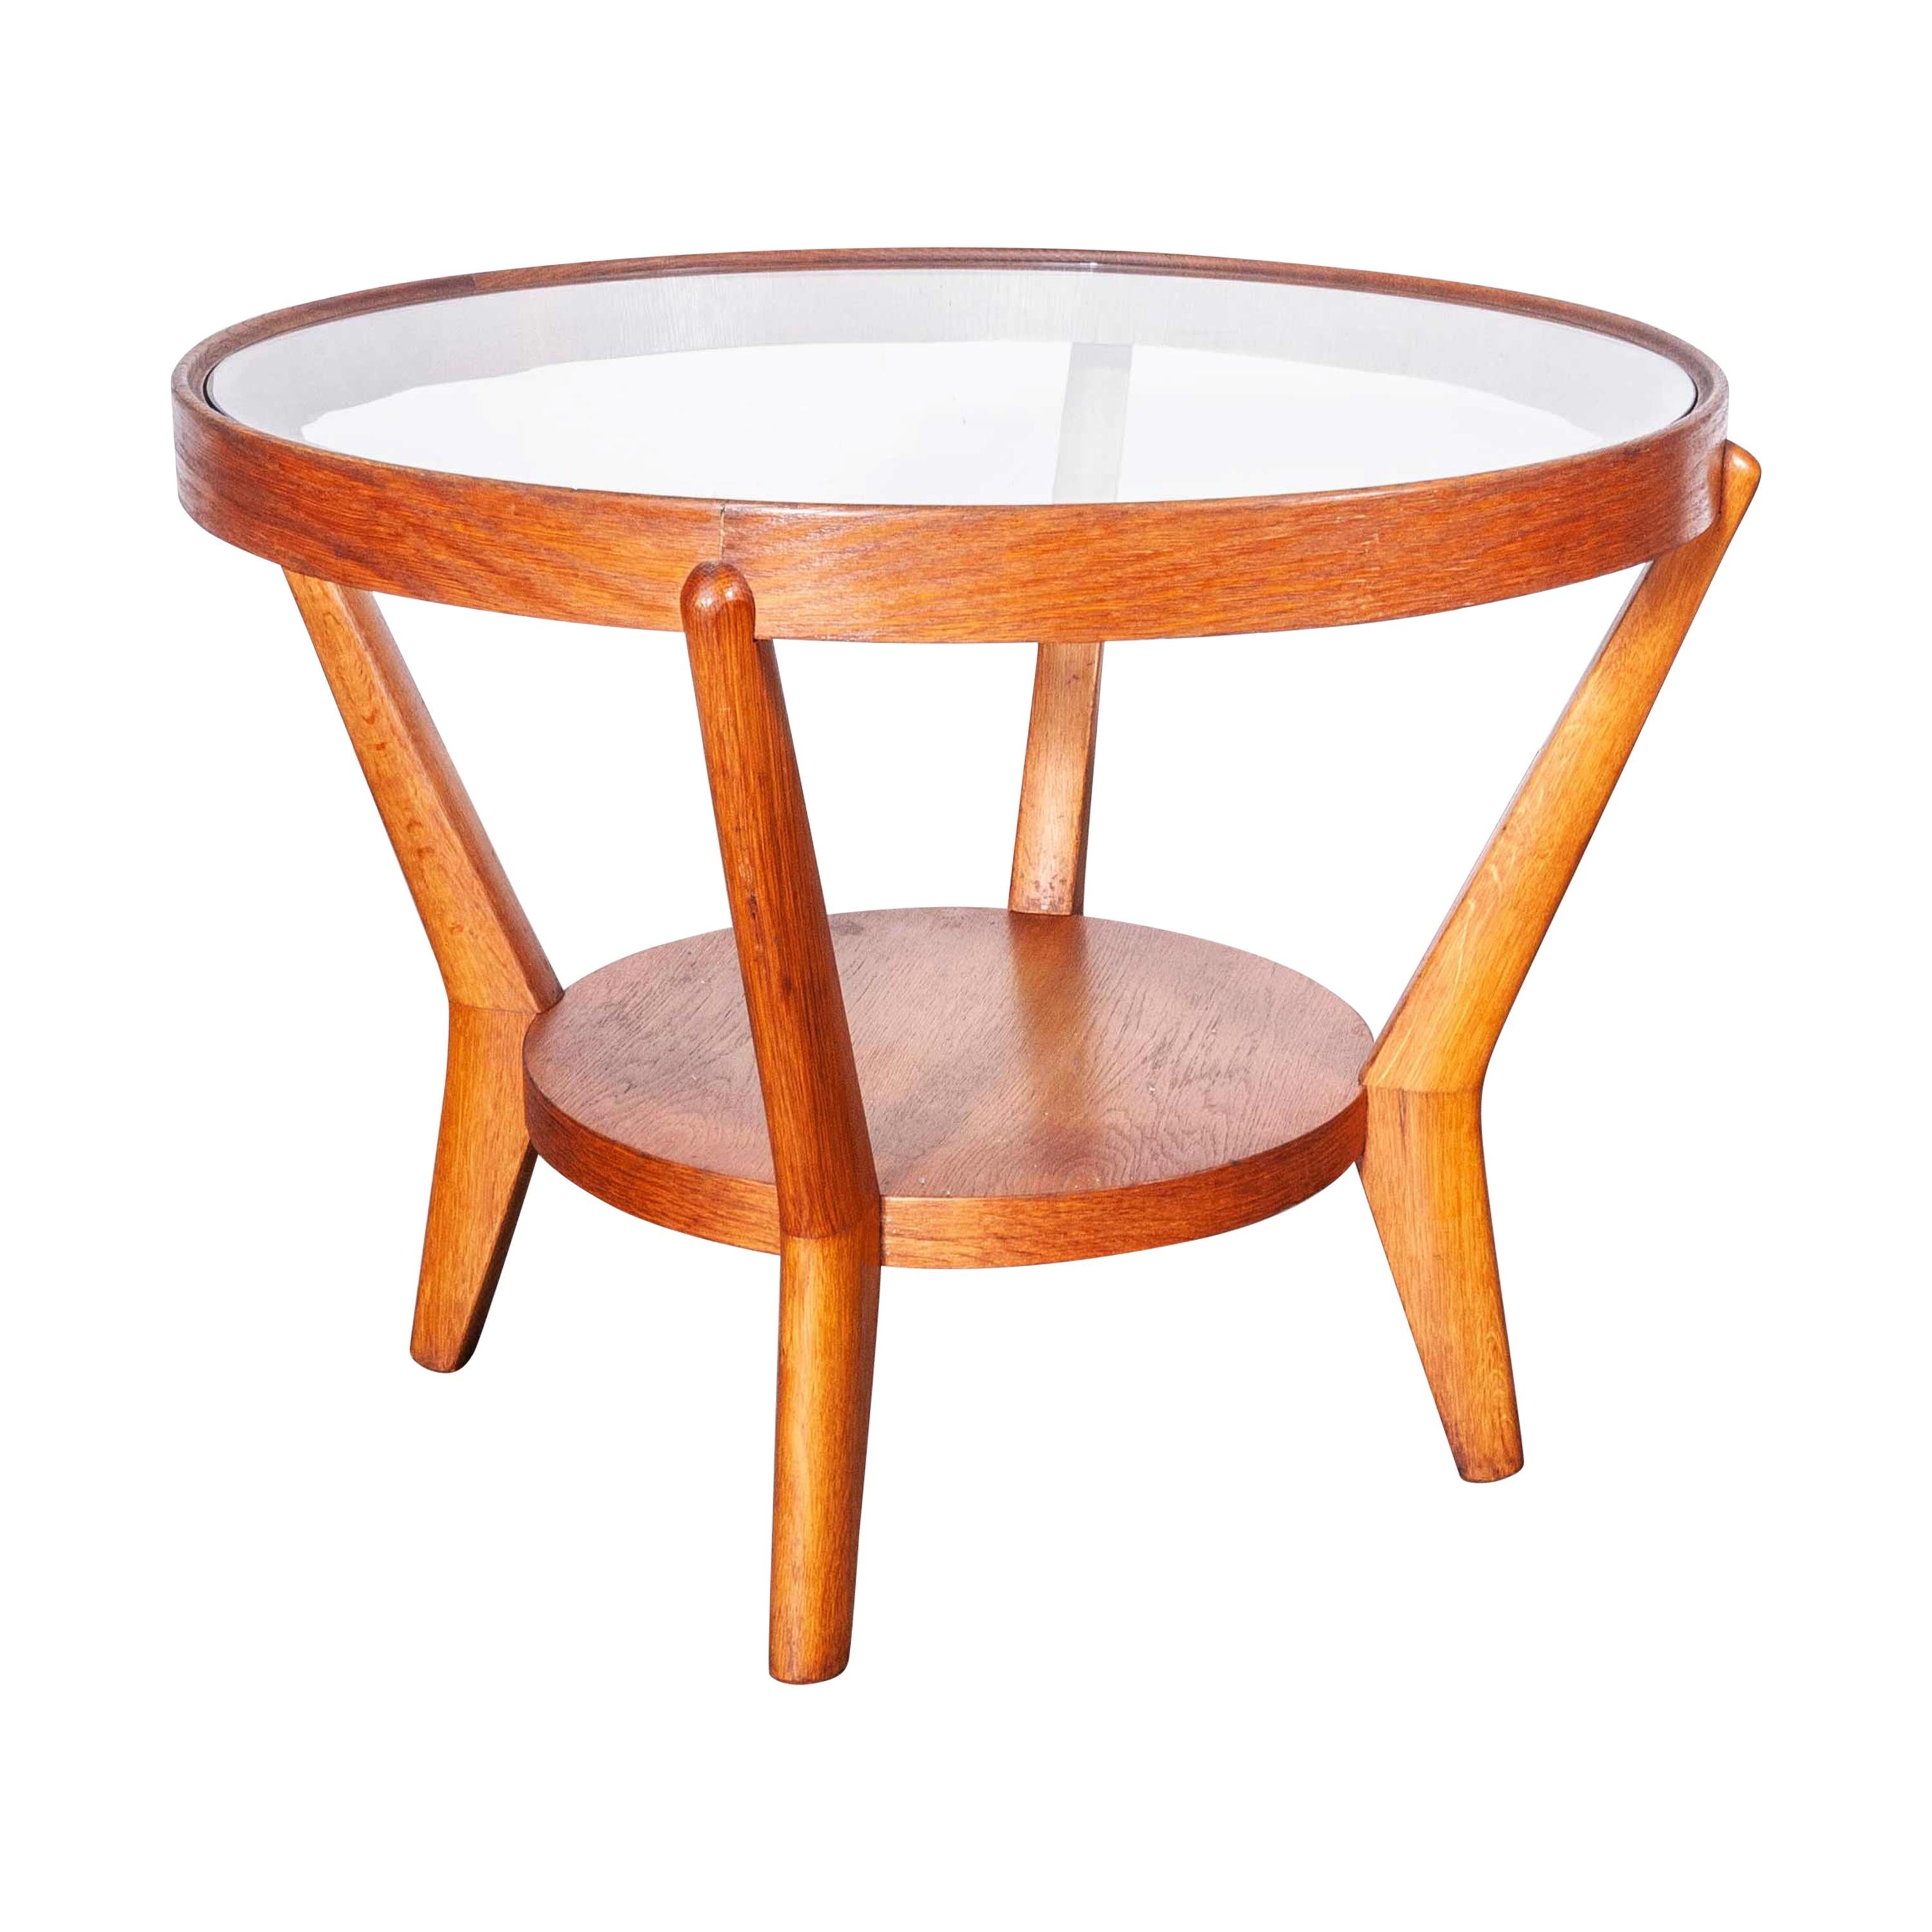 1950s Round Occasional Table by Kozelka and Kropacek for Interieur Praha, Ligh